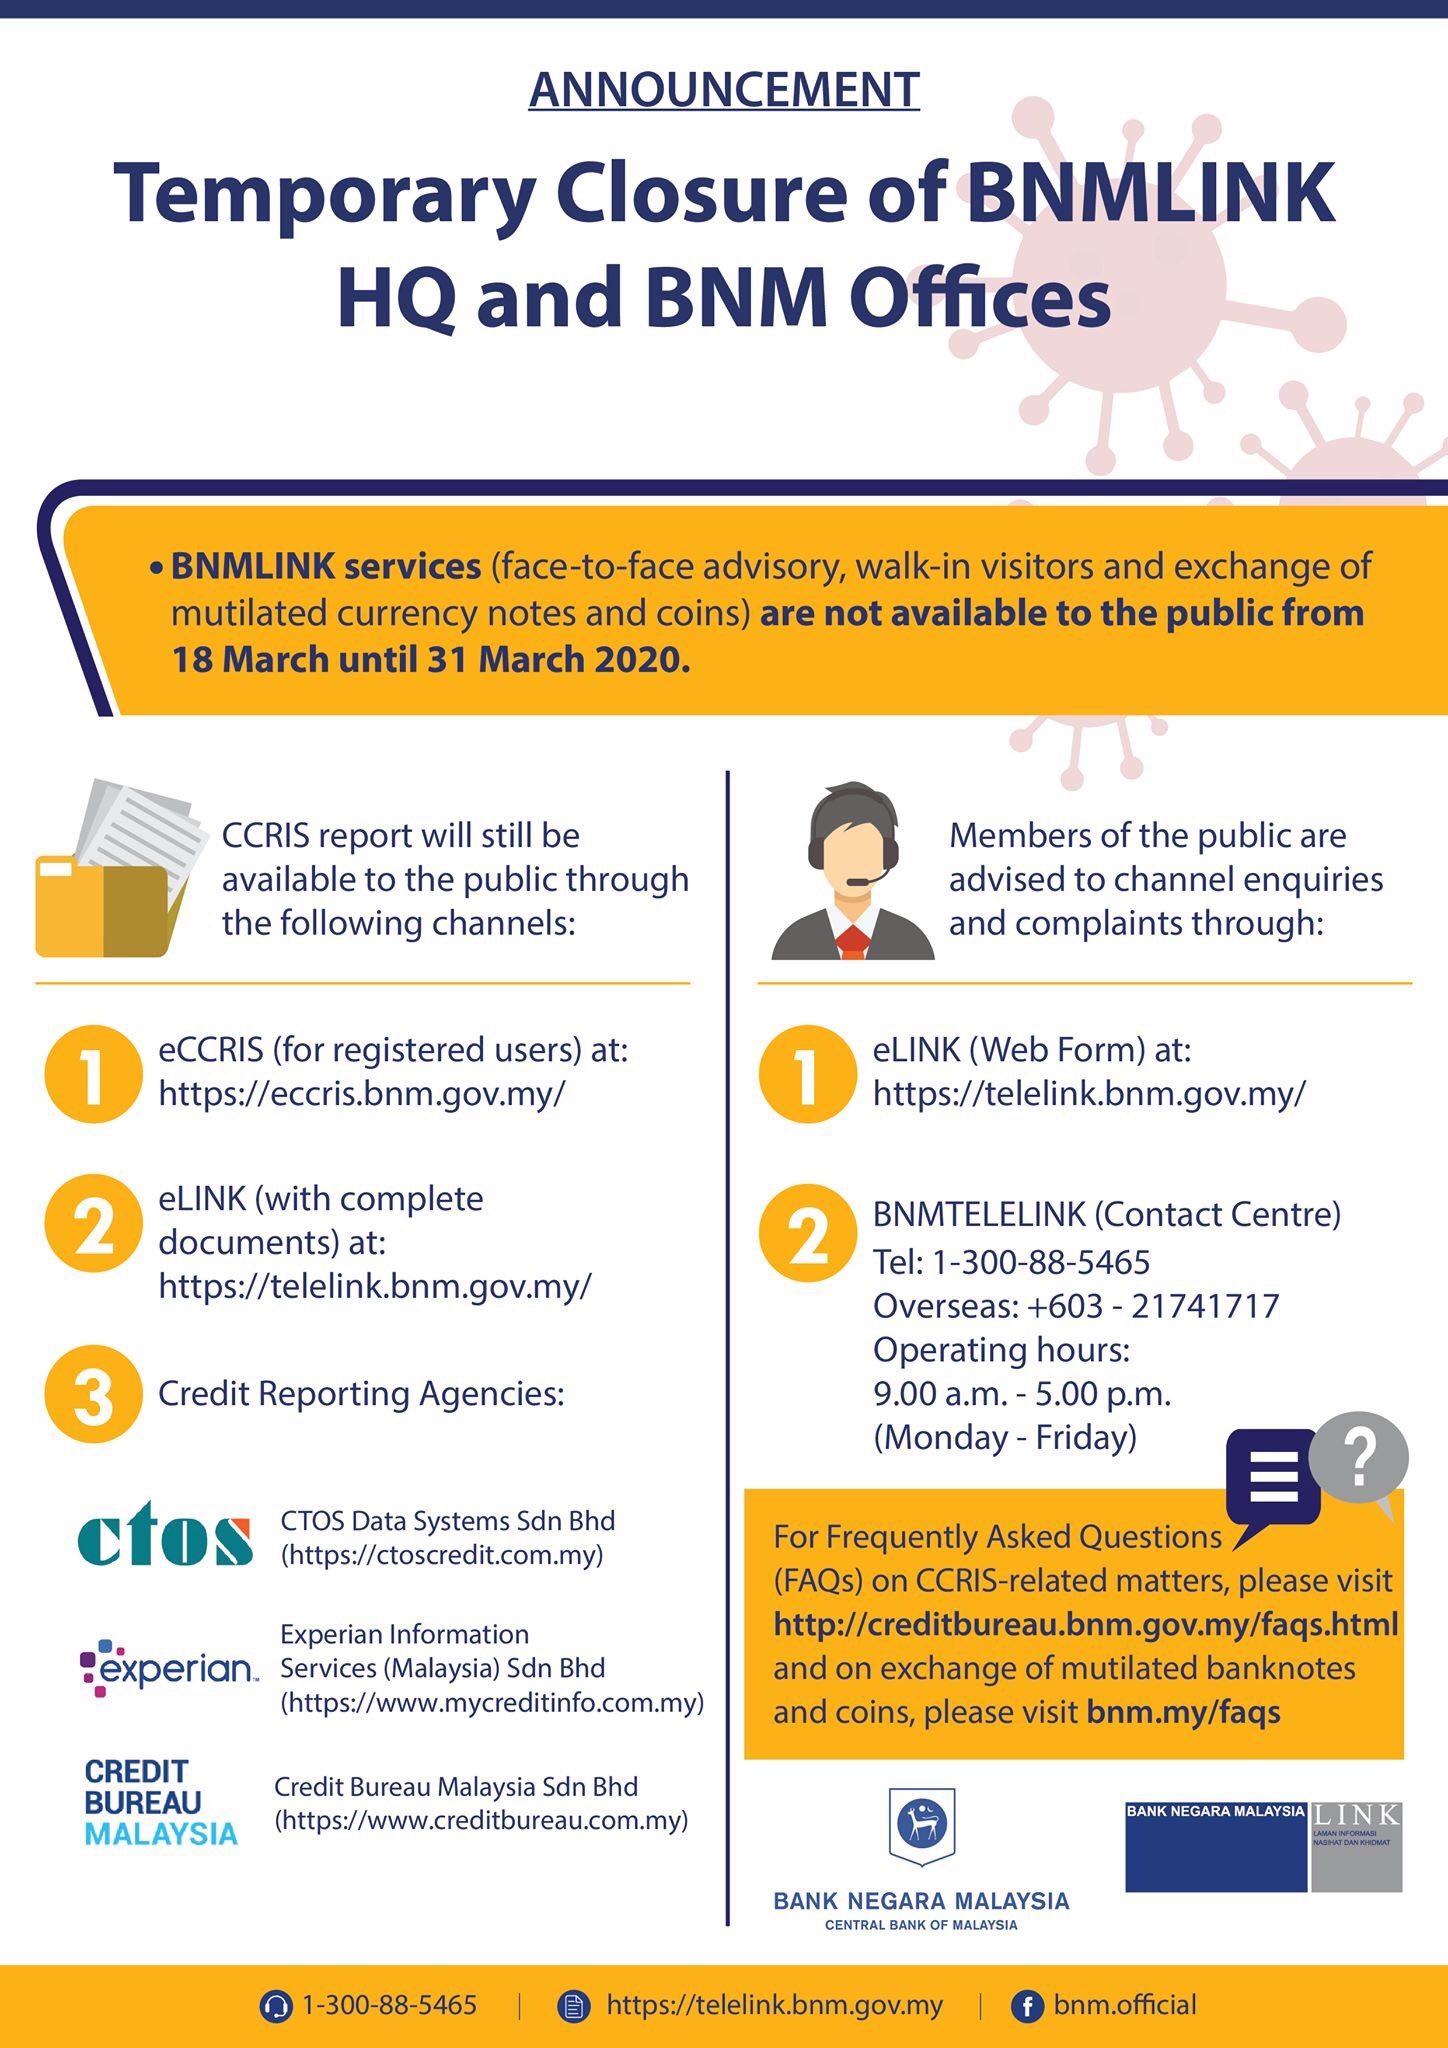 Bank Negara Malaysia On Twitter Bnmlink Offices Nationwide Closed 18 31 March Ccris Report Obtainable Online For Previously Registered Users Or From Credit Reporting Agencies Other Queries Pls Use Elink Form Or Call